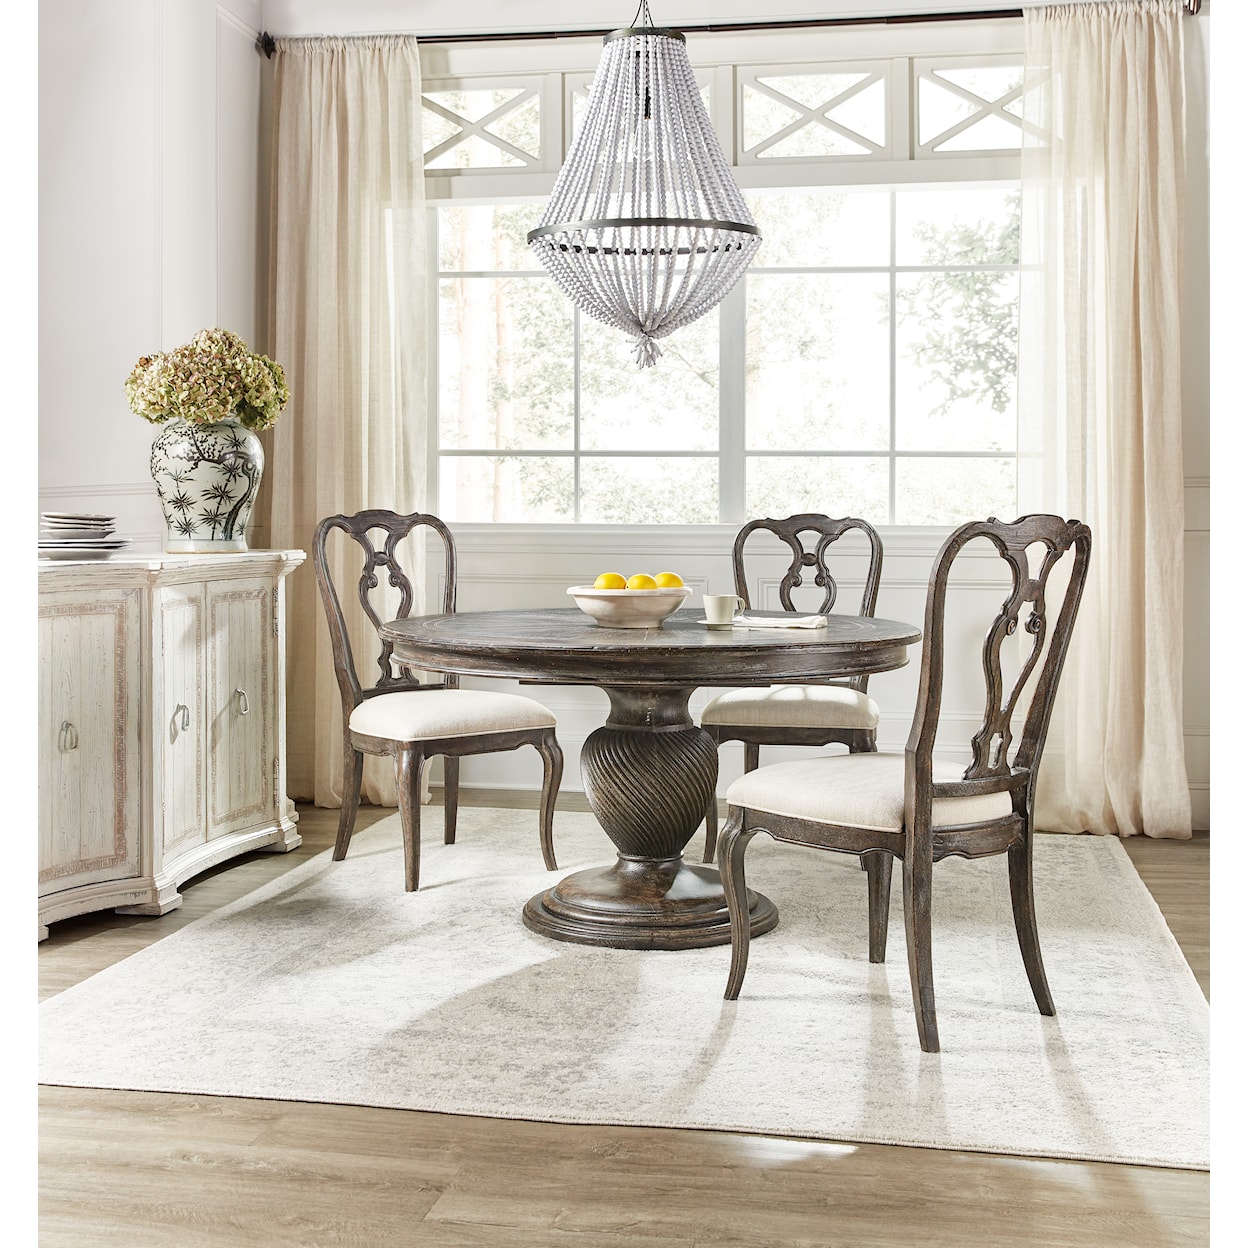 Hooker Furniture Traditions 4-Piece Dining Set with Round Table